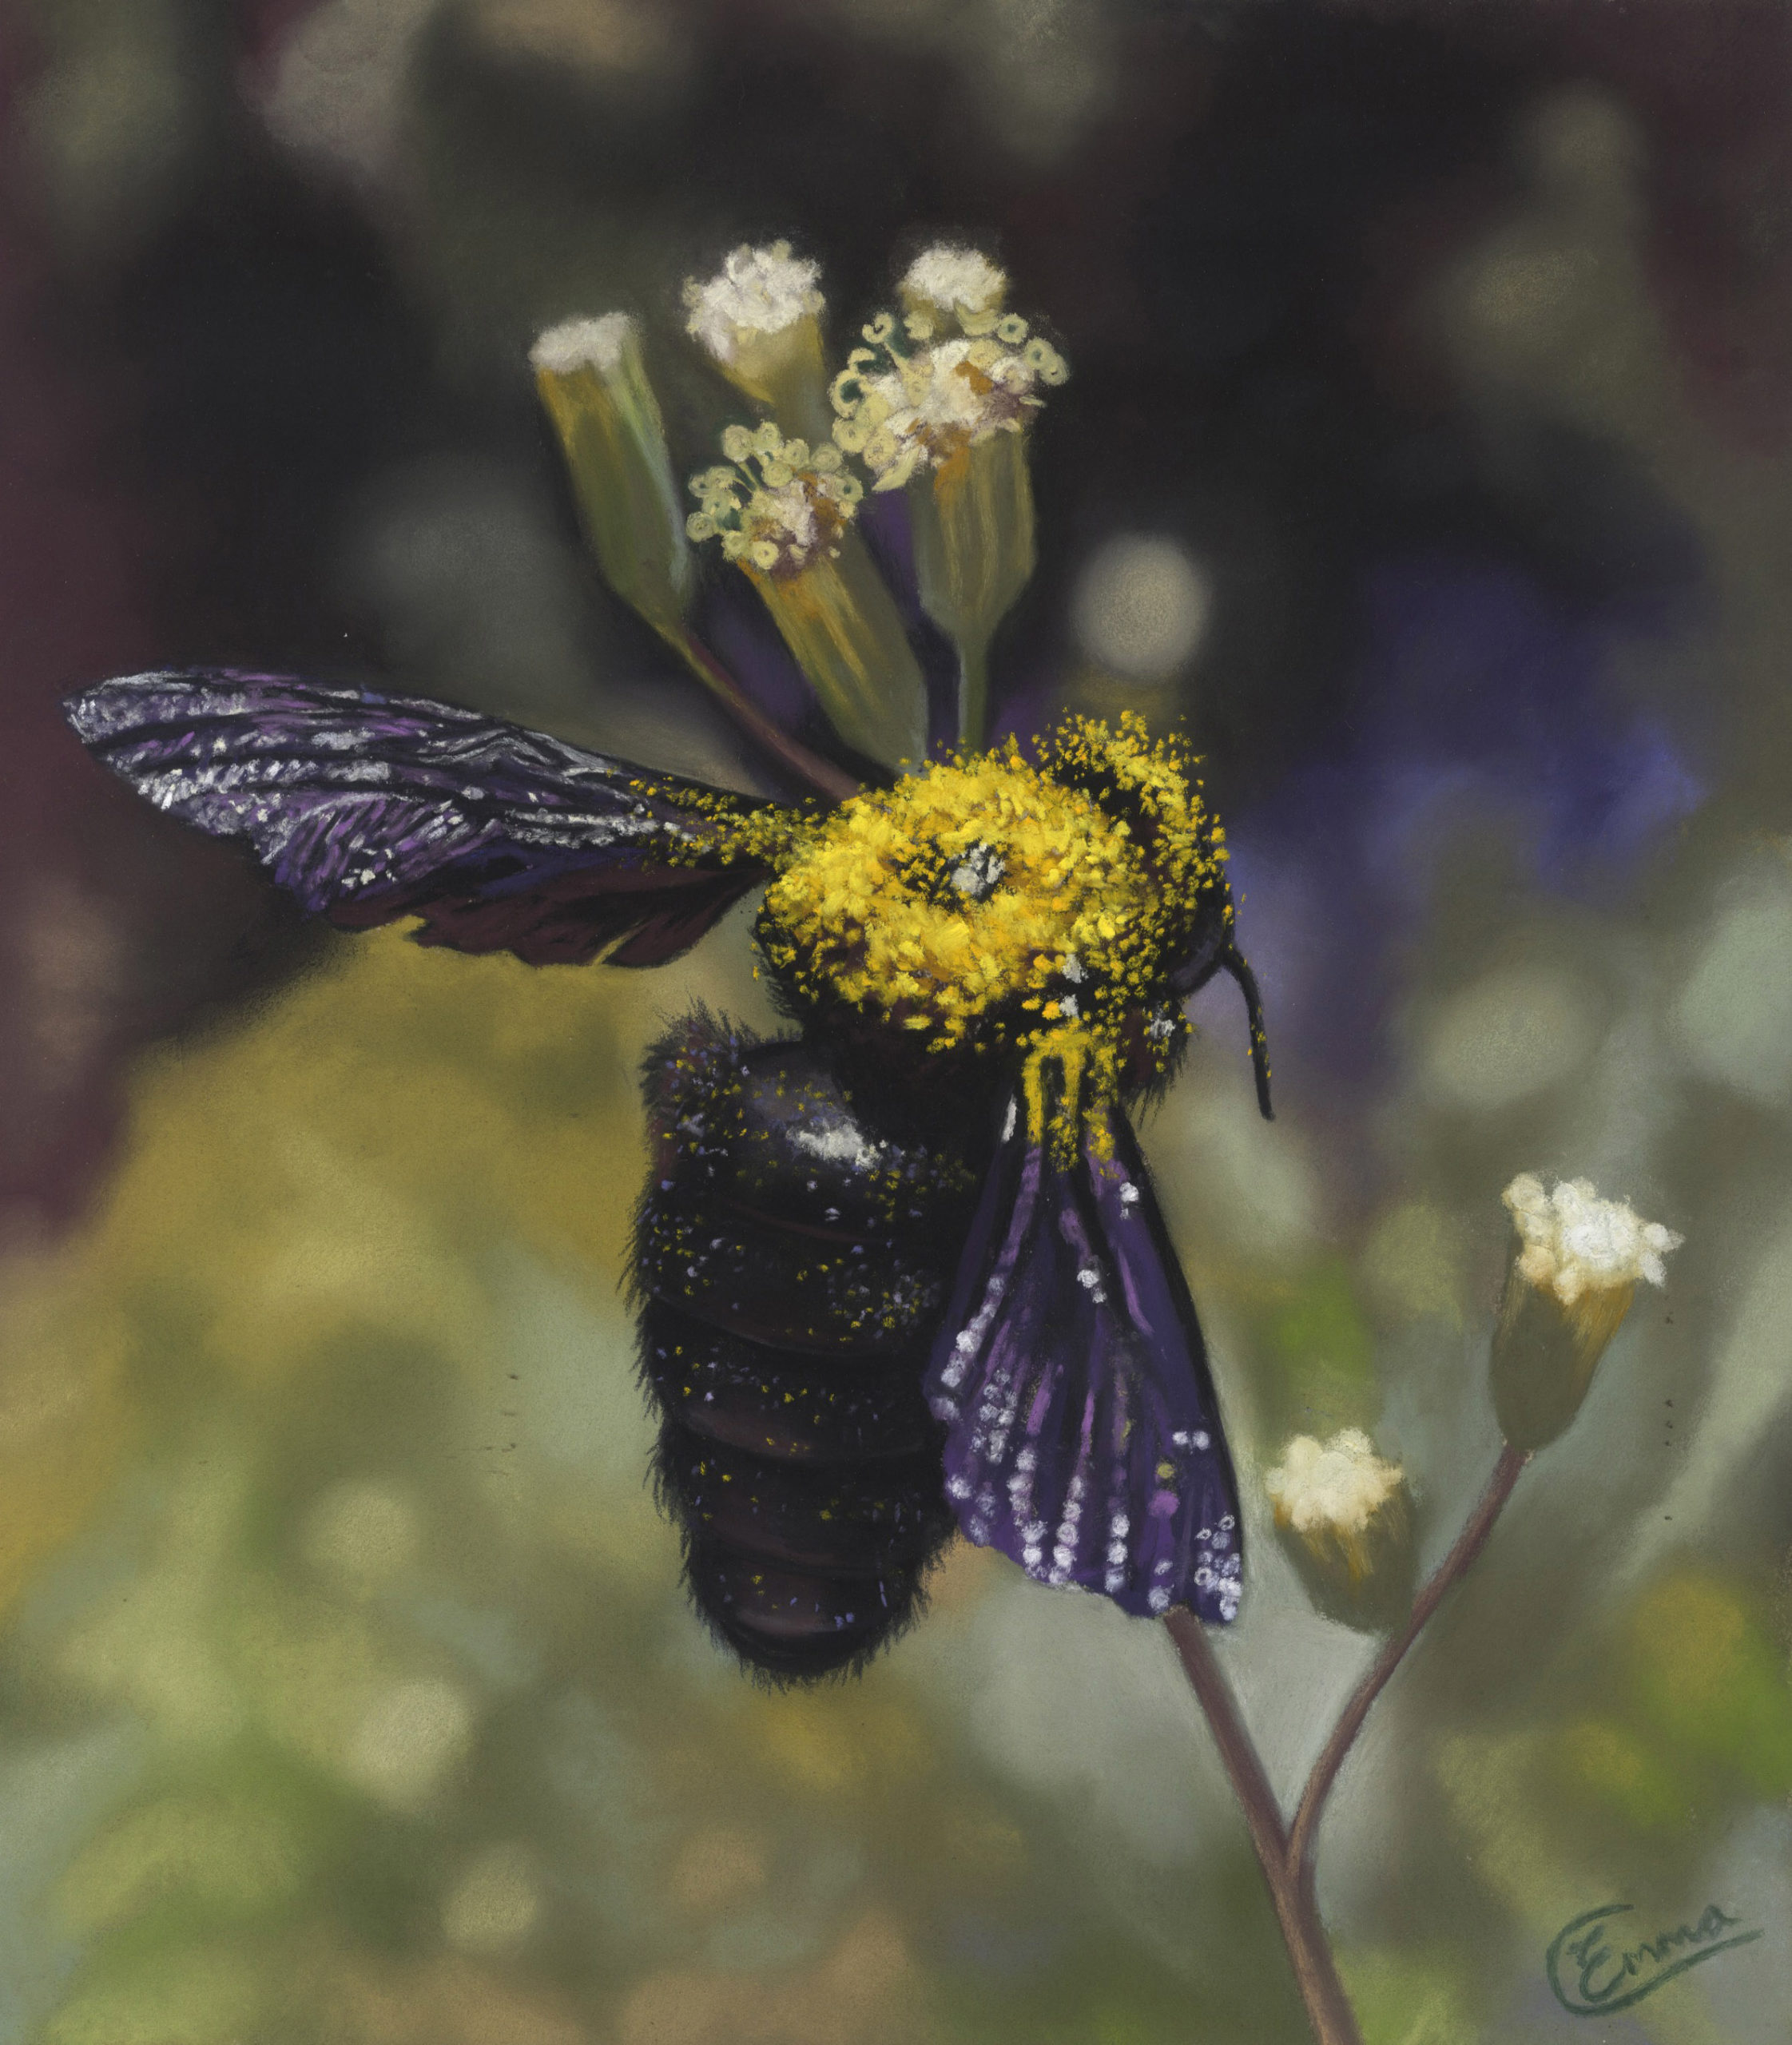 Emma Colbert, Carpenter Bee, Unison Colour pastels on Fisher 400, 12 x 10 in